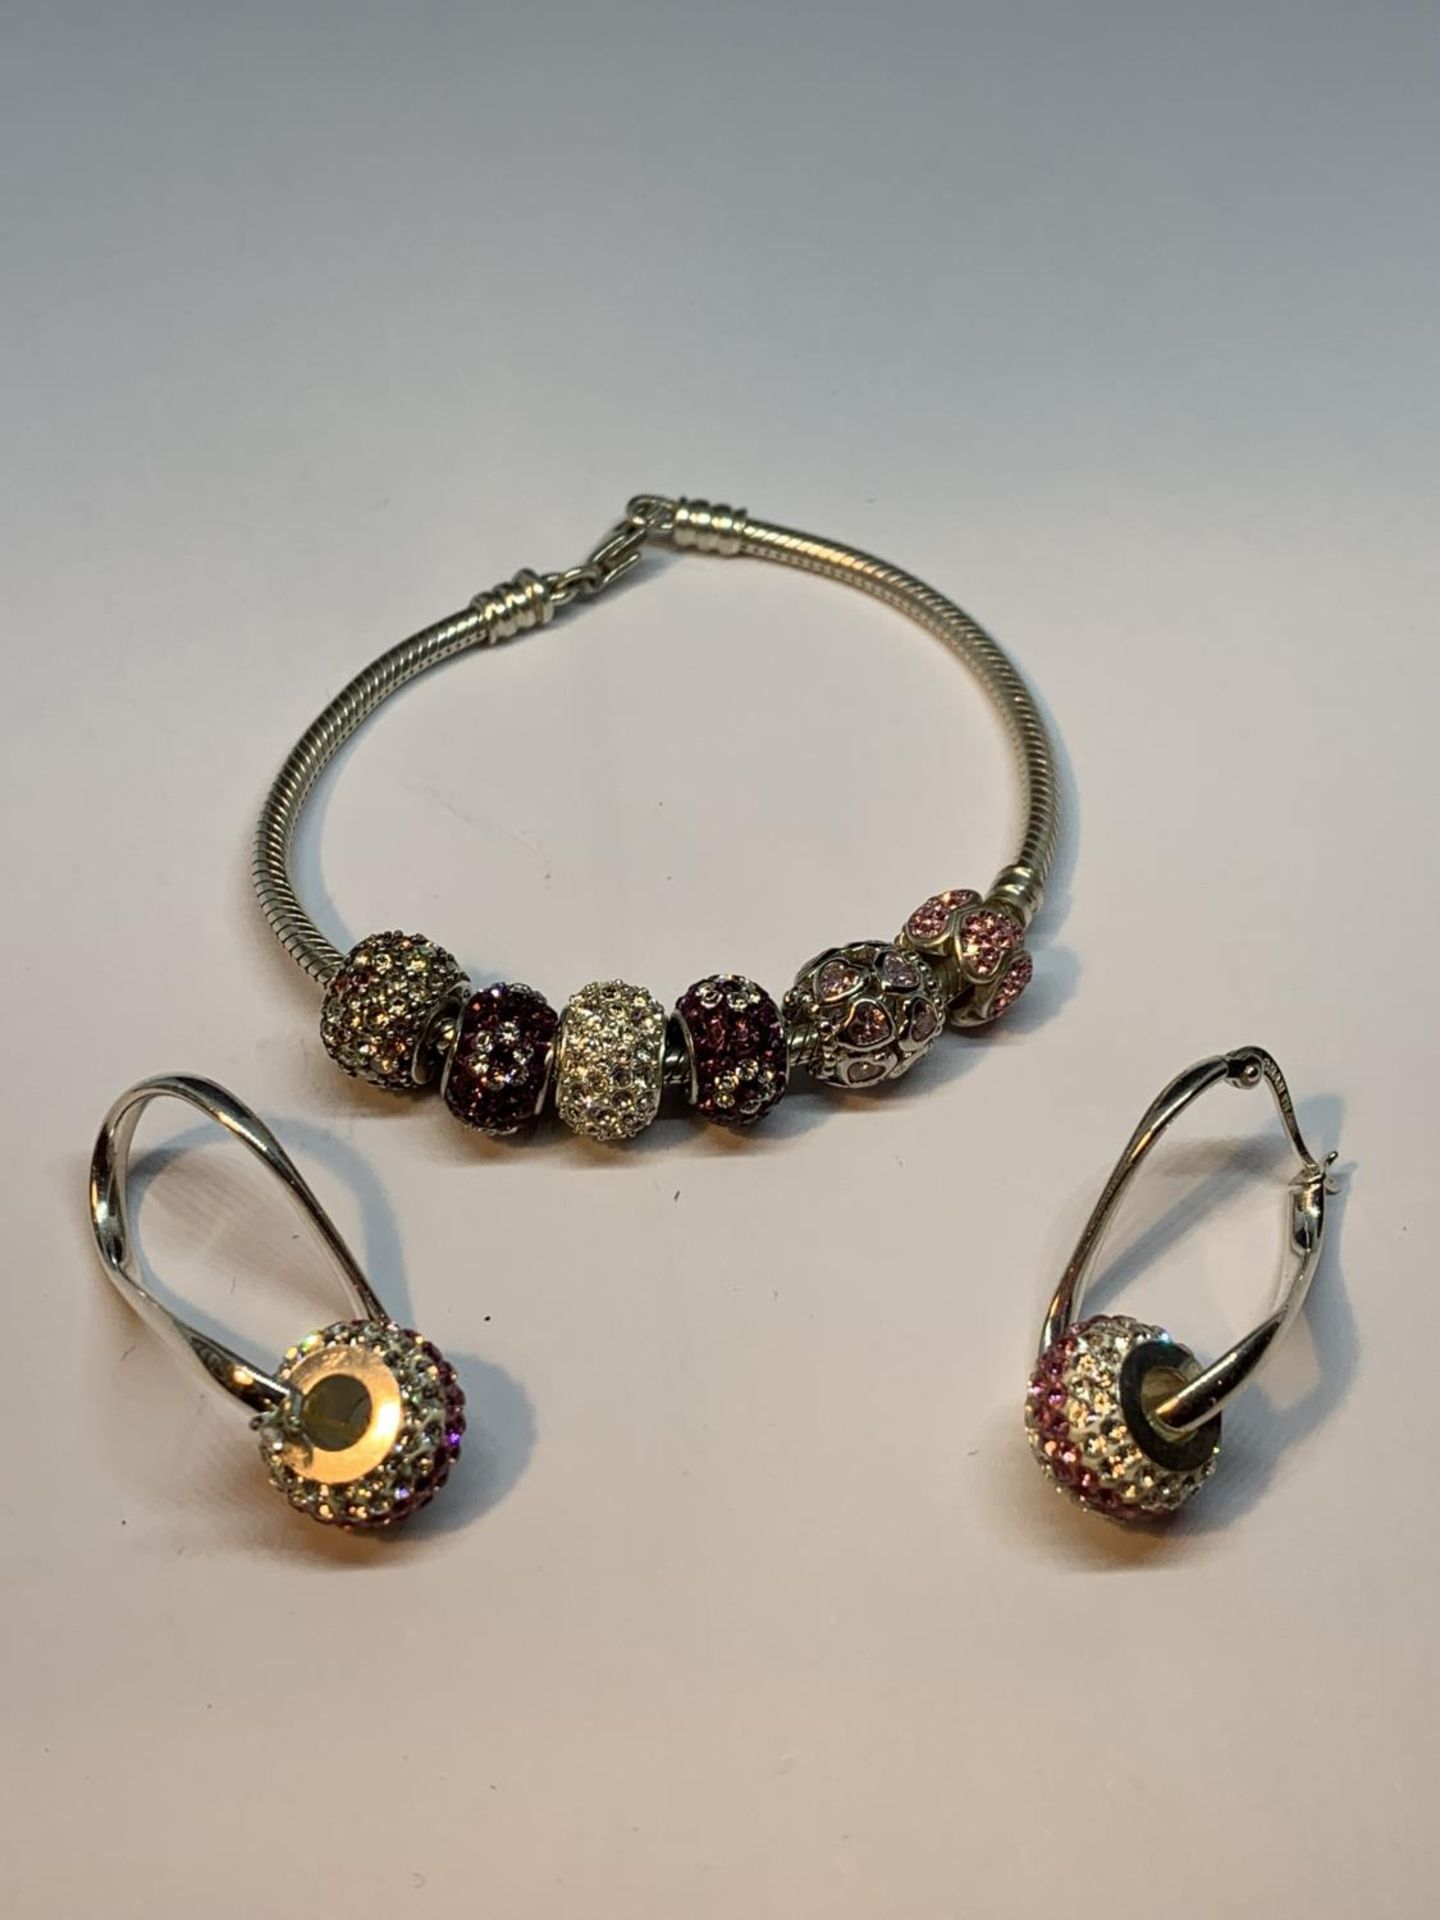 A SILVER PANDORA STYLE BRACELET WITH SIX CHARMS AND A PAIR OF CHARM EARRINGS